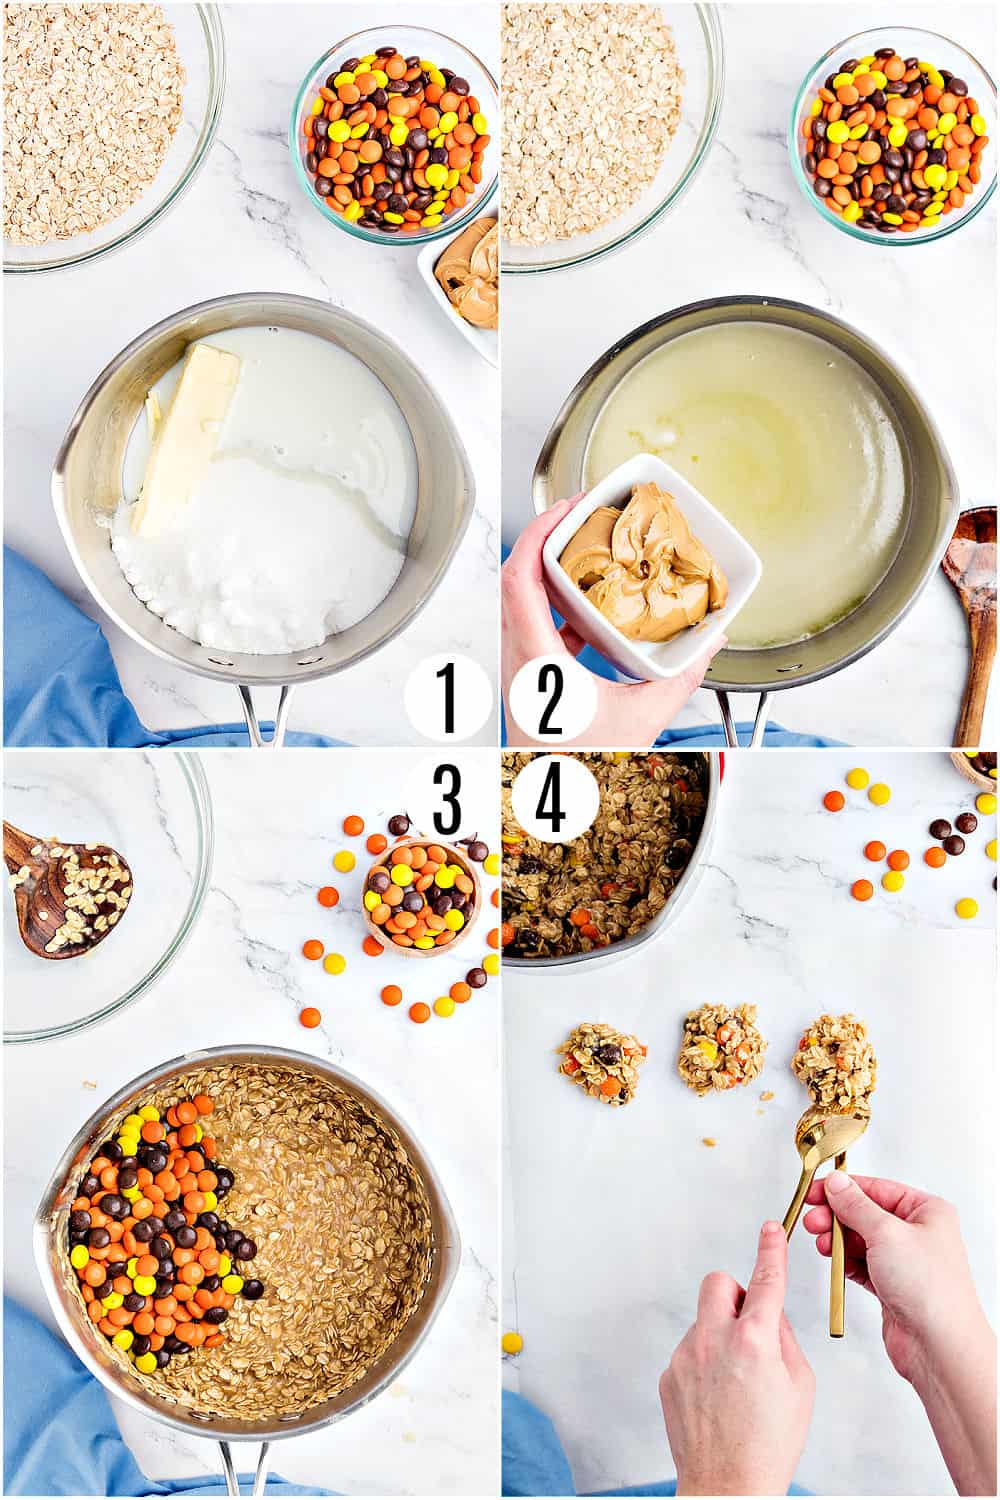 Step by step photos showing how to make no bake cookies.